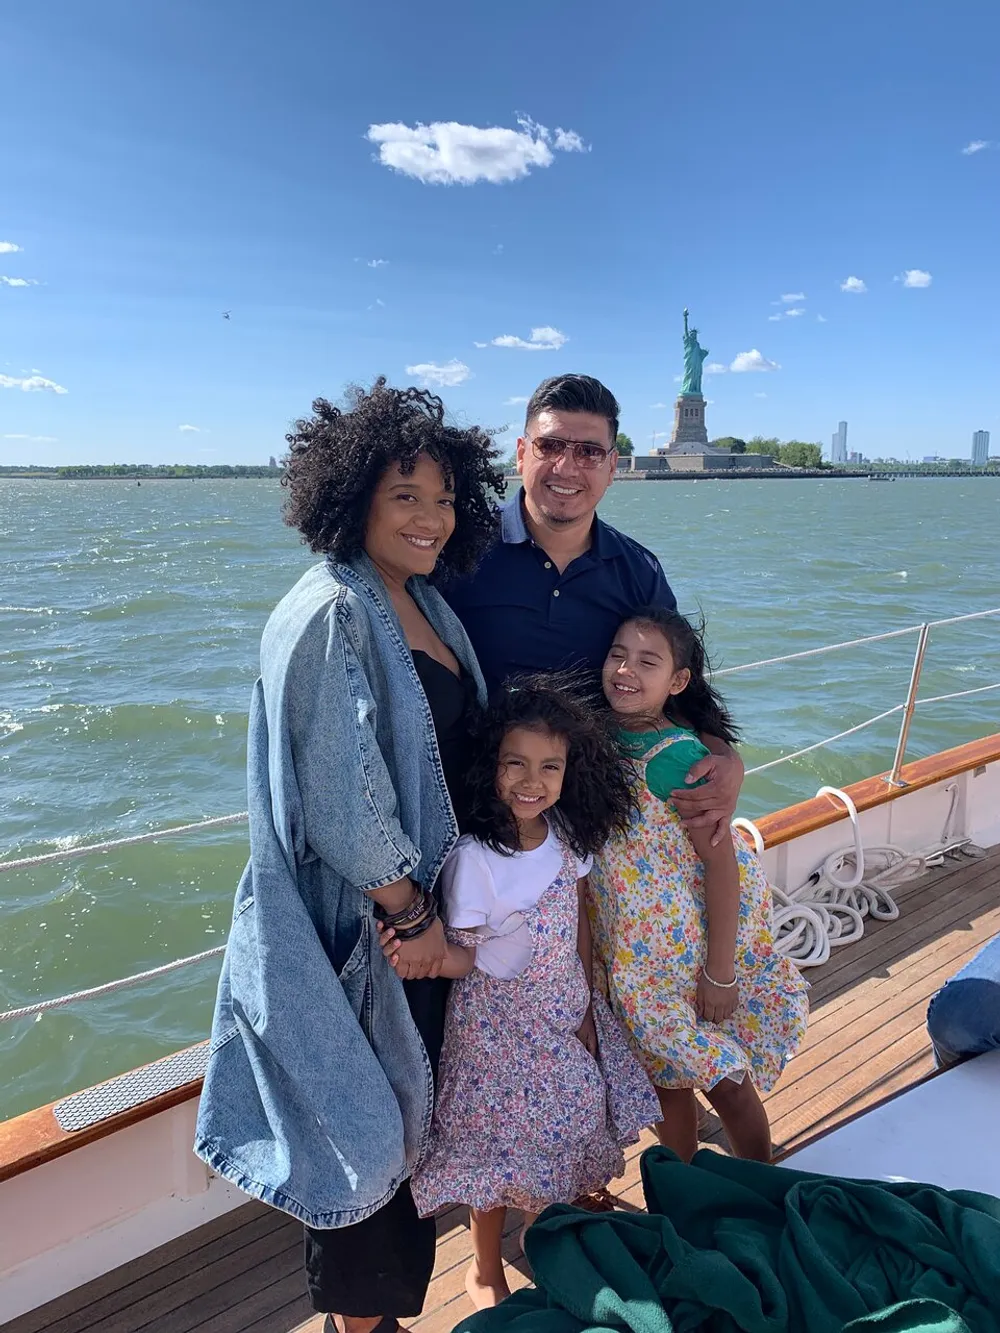 A happy family is posing for a photo on a boat with the Statue of Liberty in the background on a sunny day